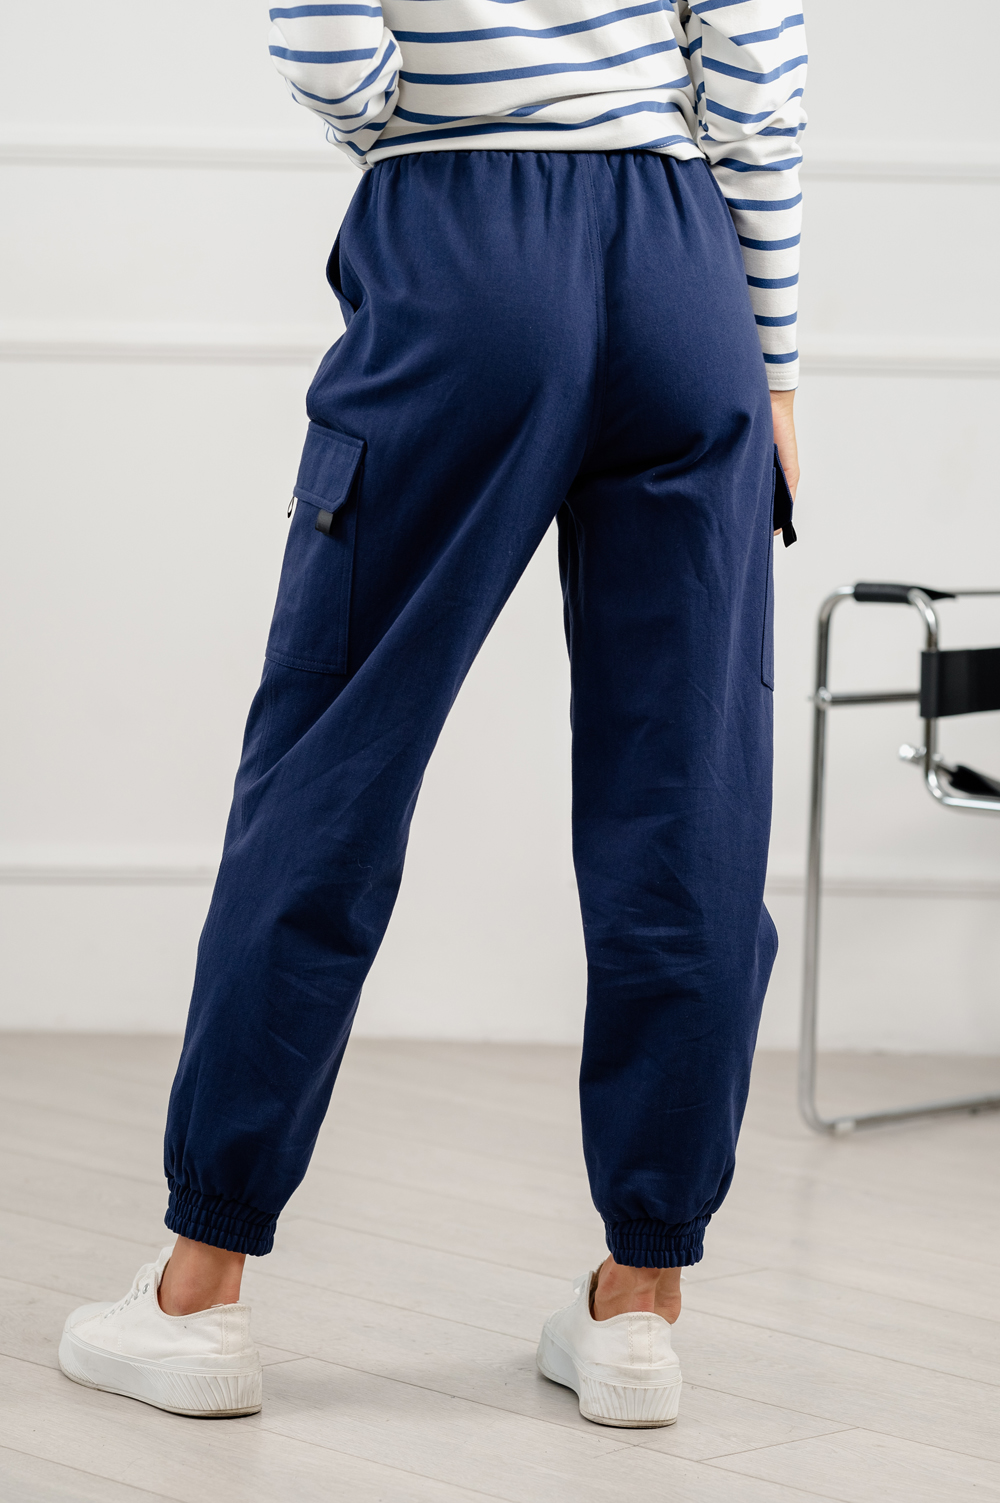 Blue cargo pants in casual style.